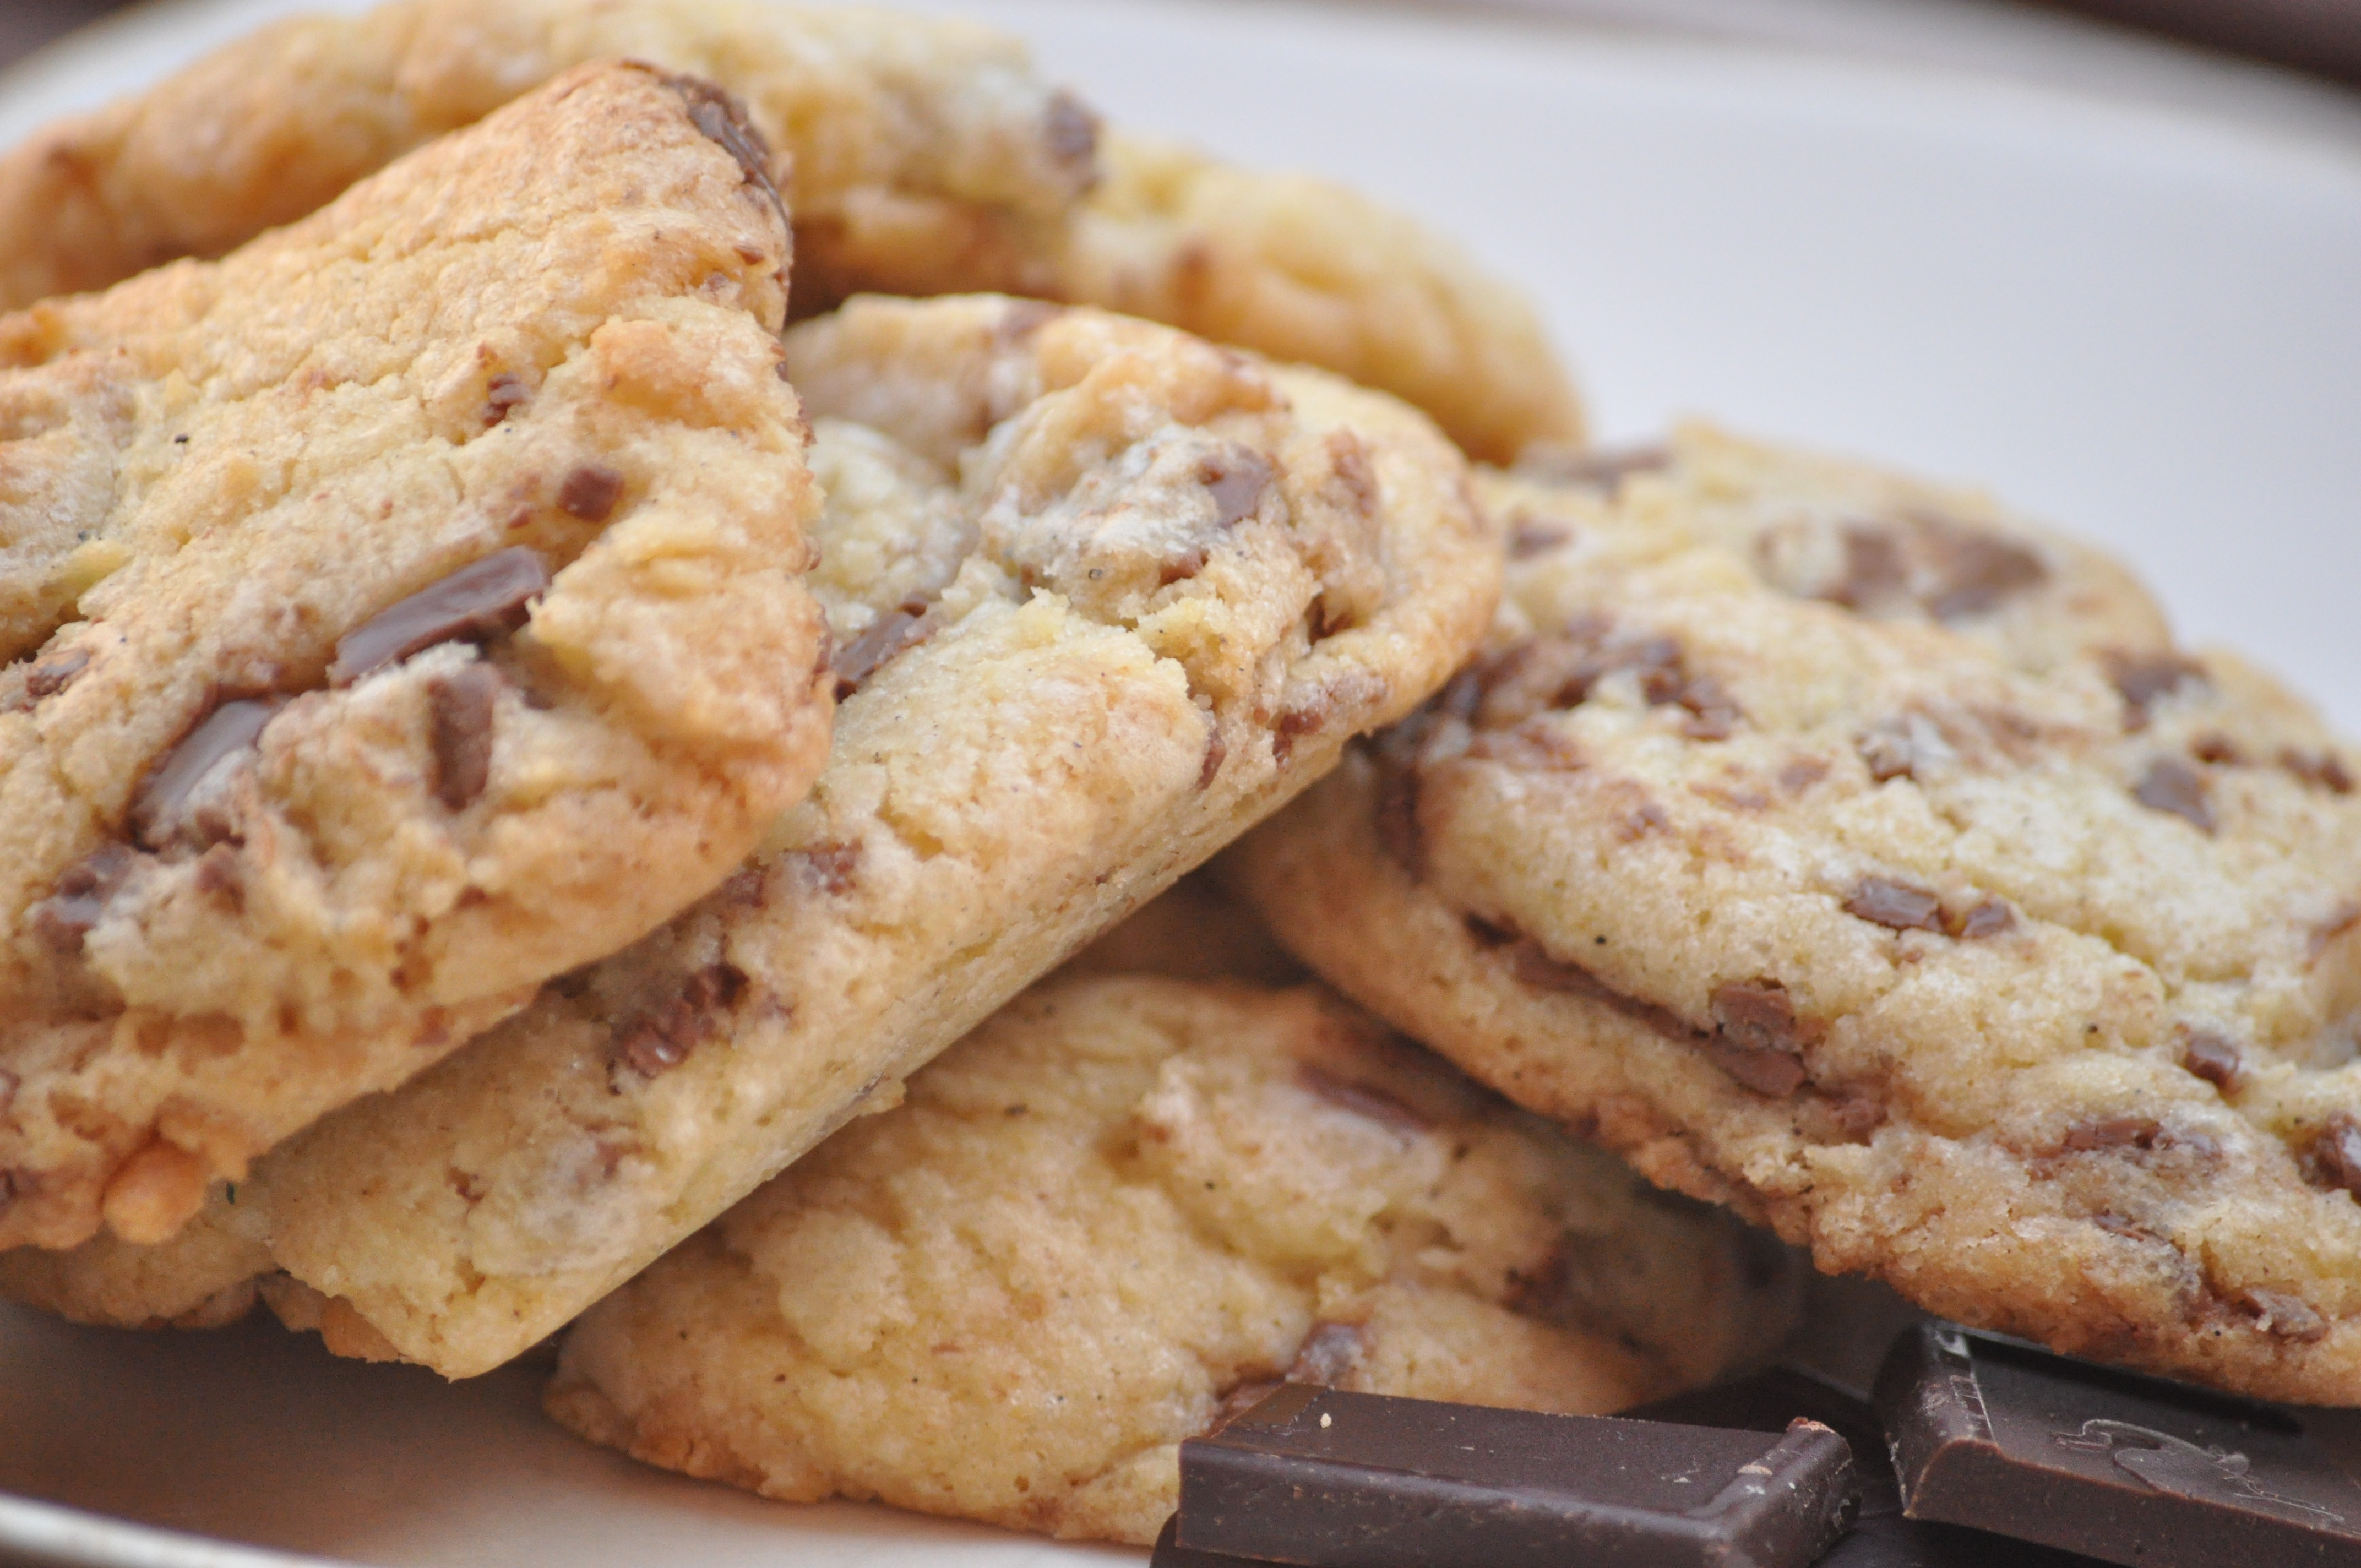 Chocolate chip cookies (the chewy version)